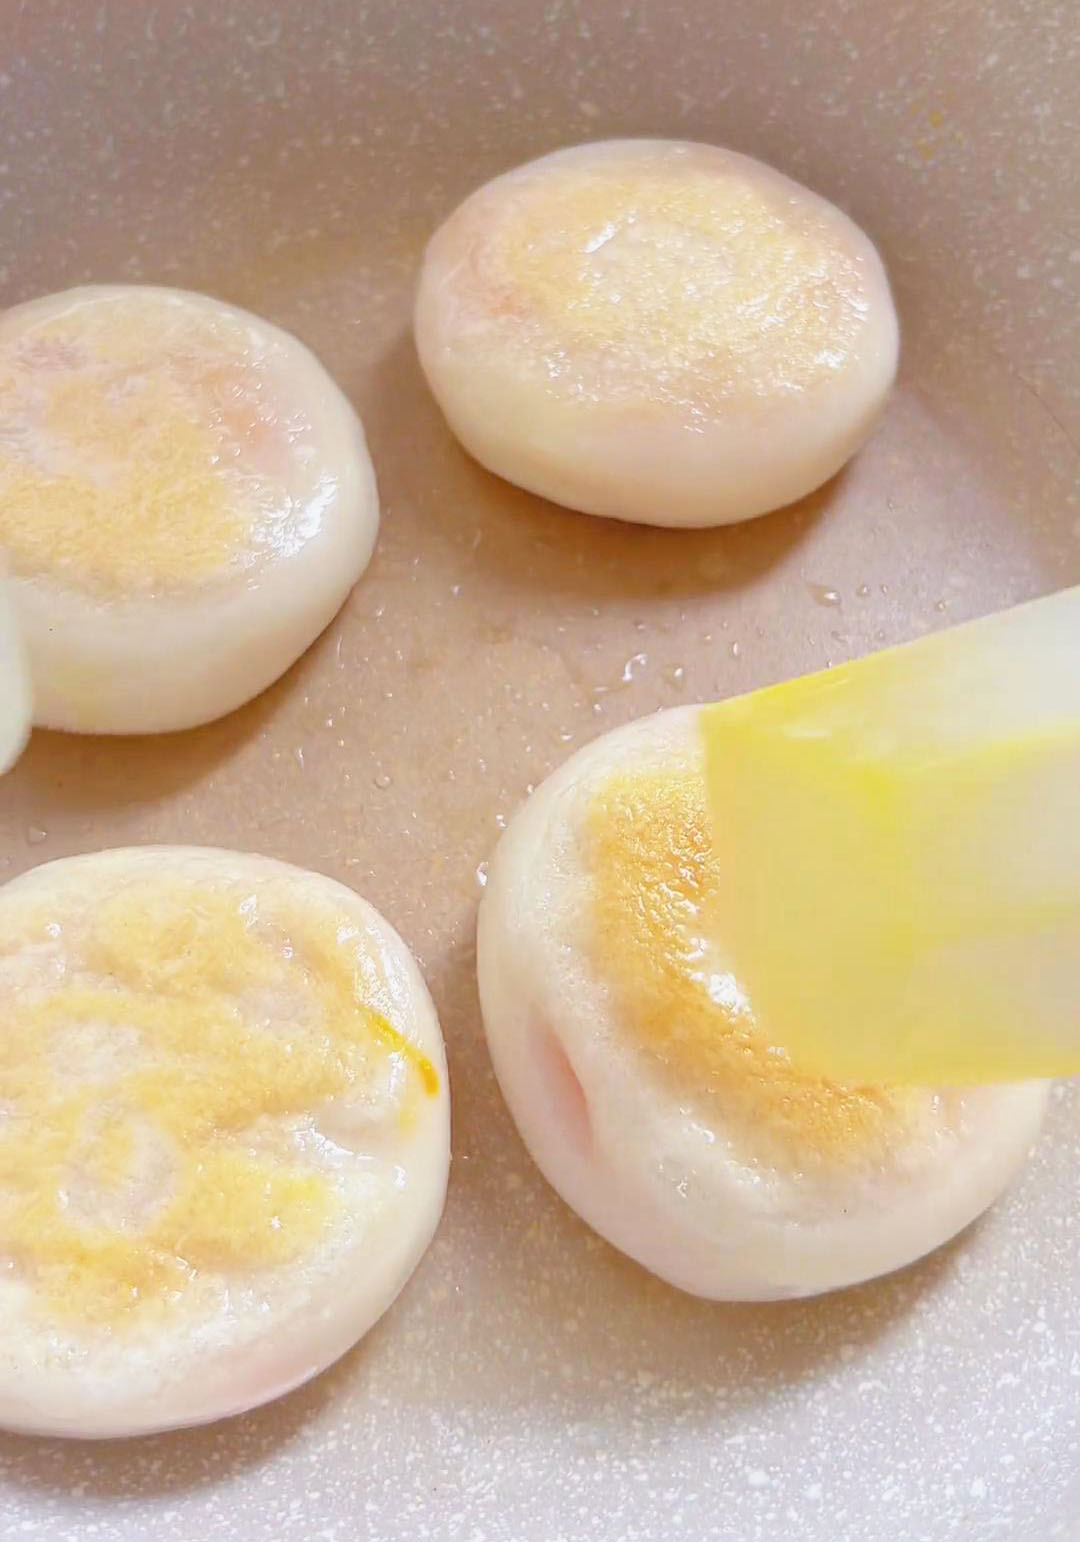 Fry the mochi until both sides are golden brown and crispy